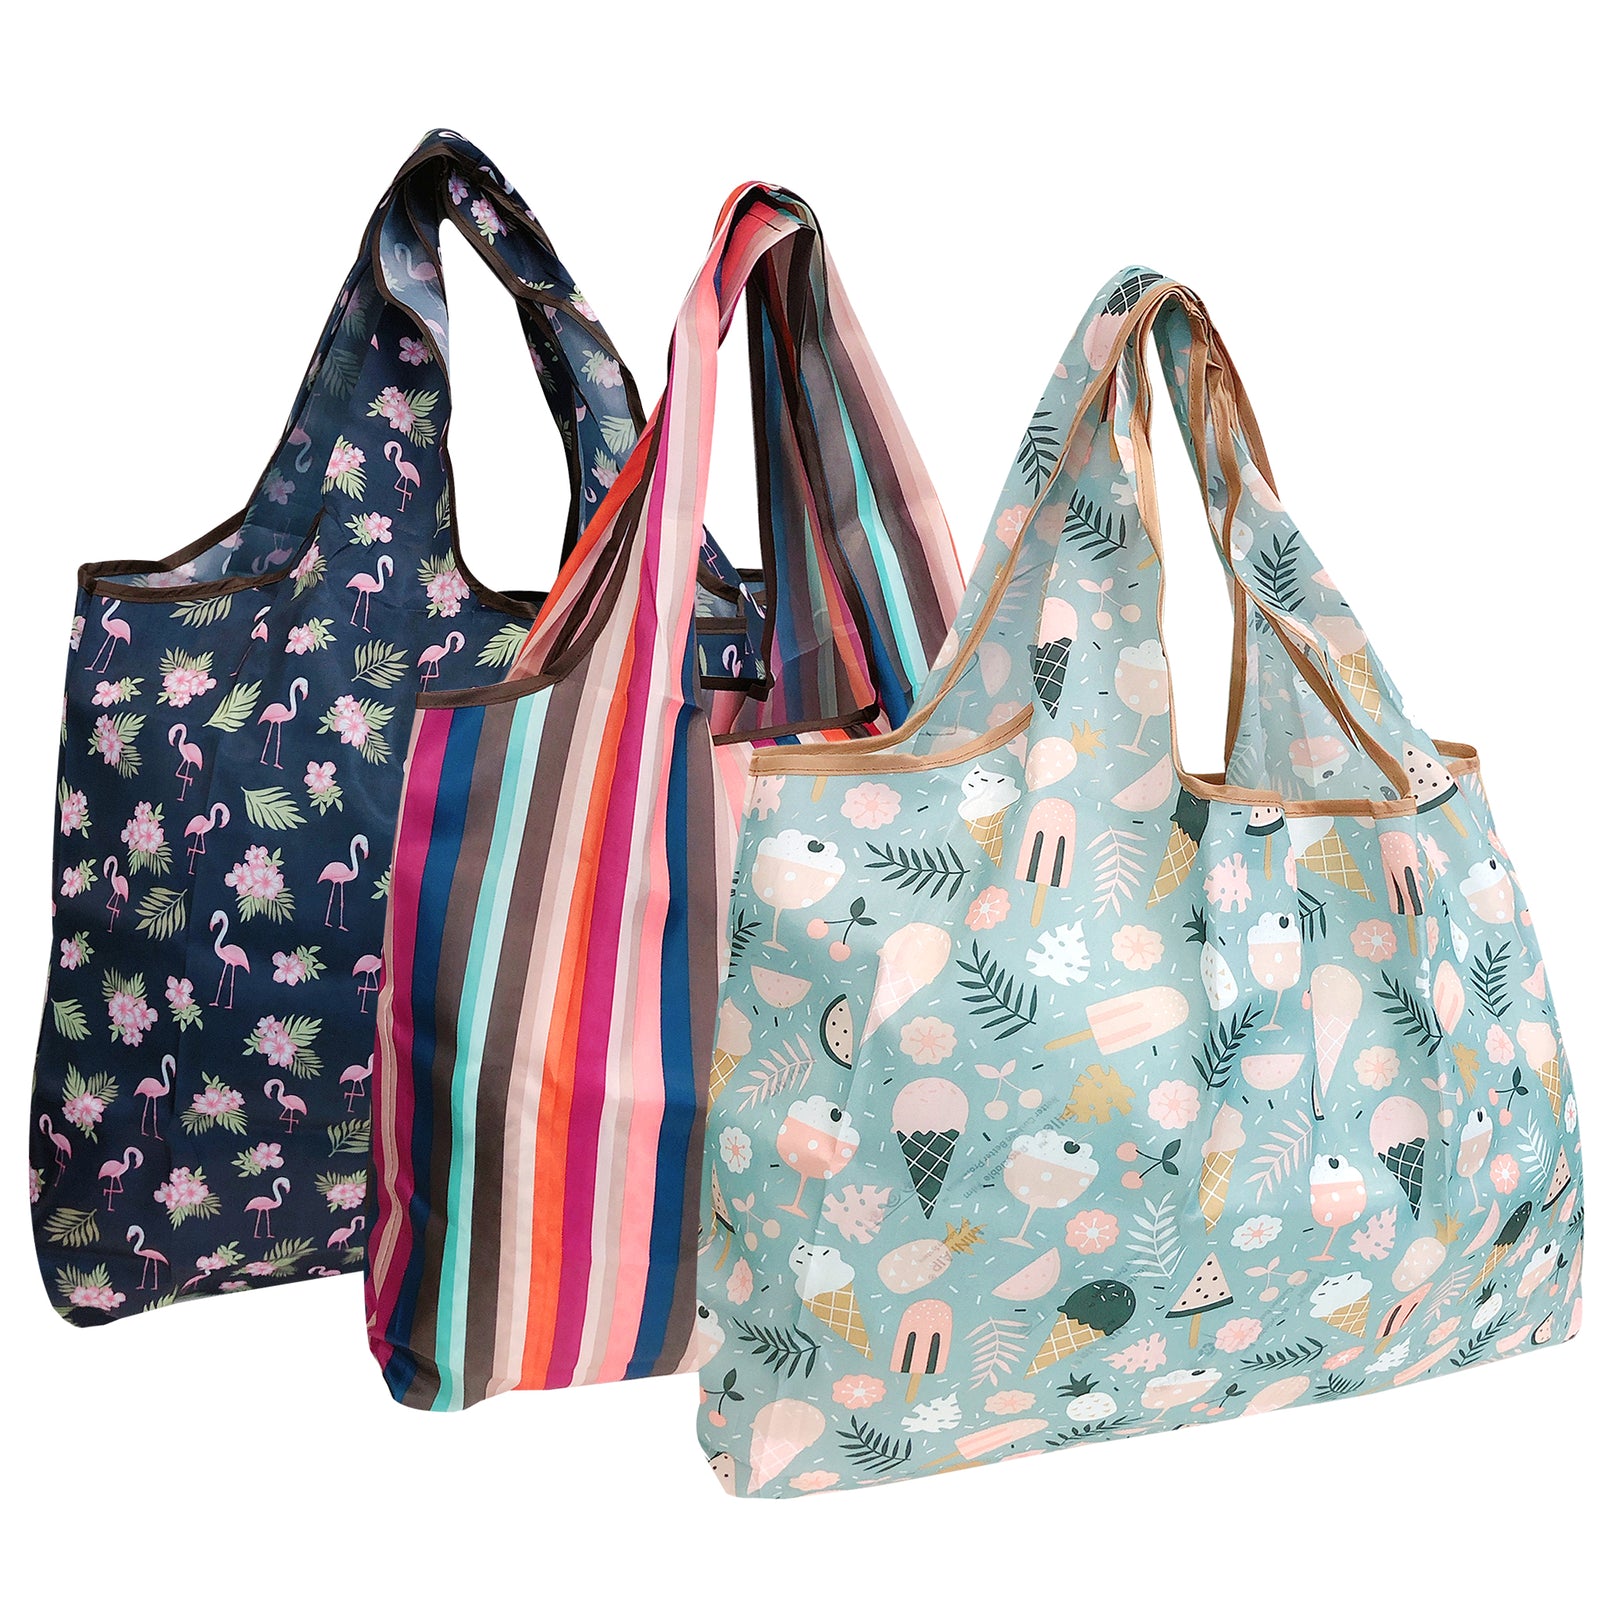 Wrapables Eco-Friendly Large Nylon Reusable Shopping Bags (Set of 3)